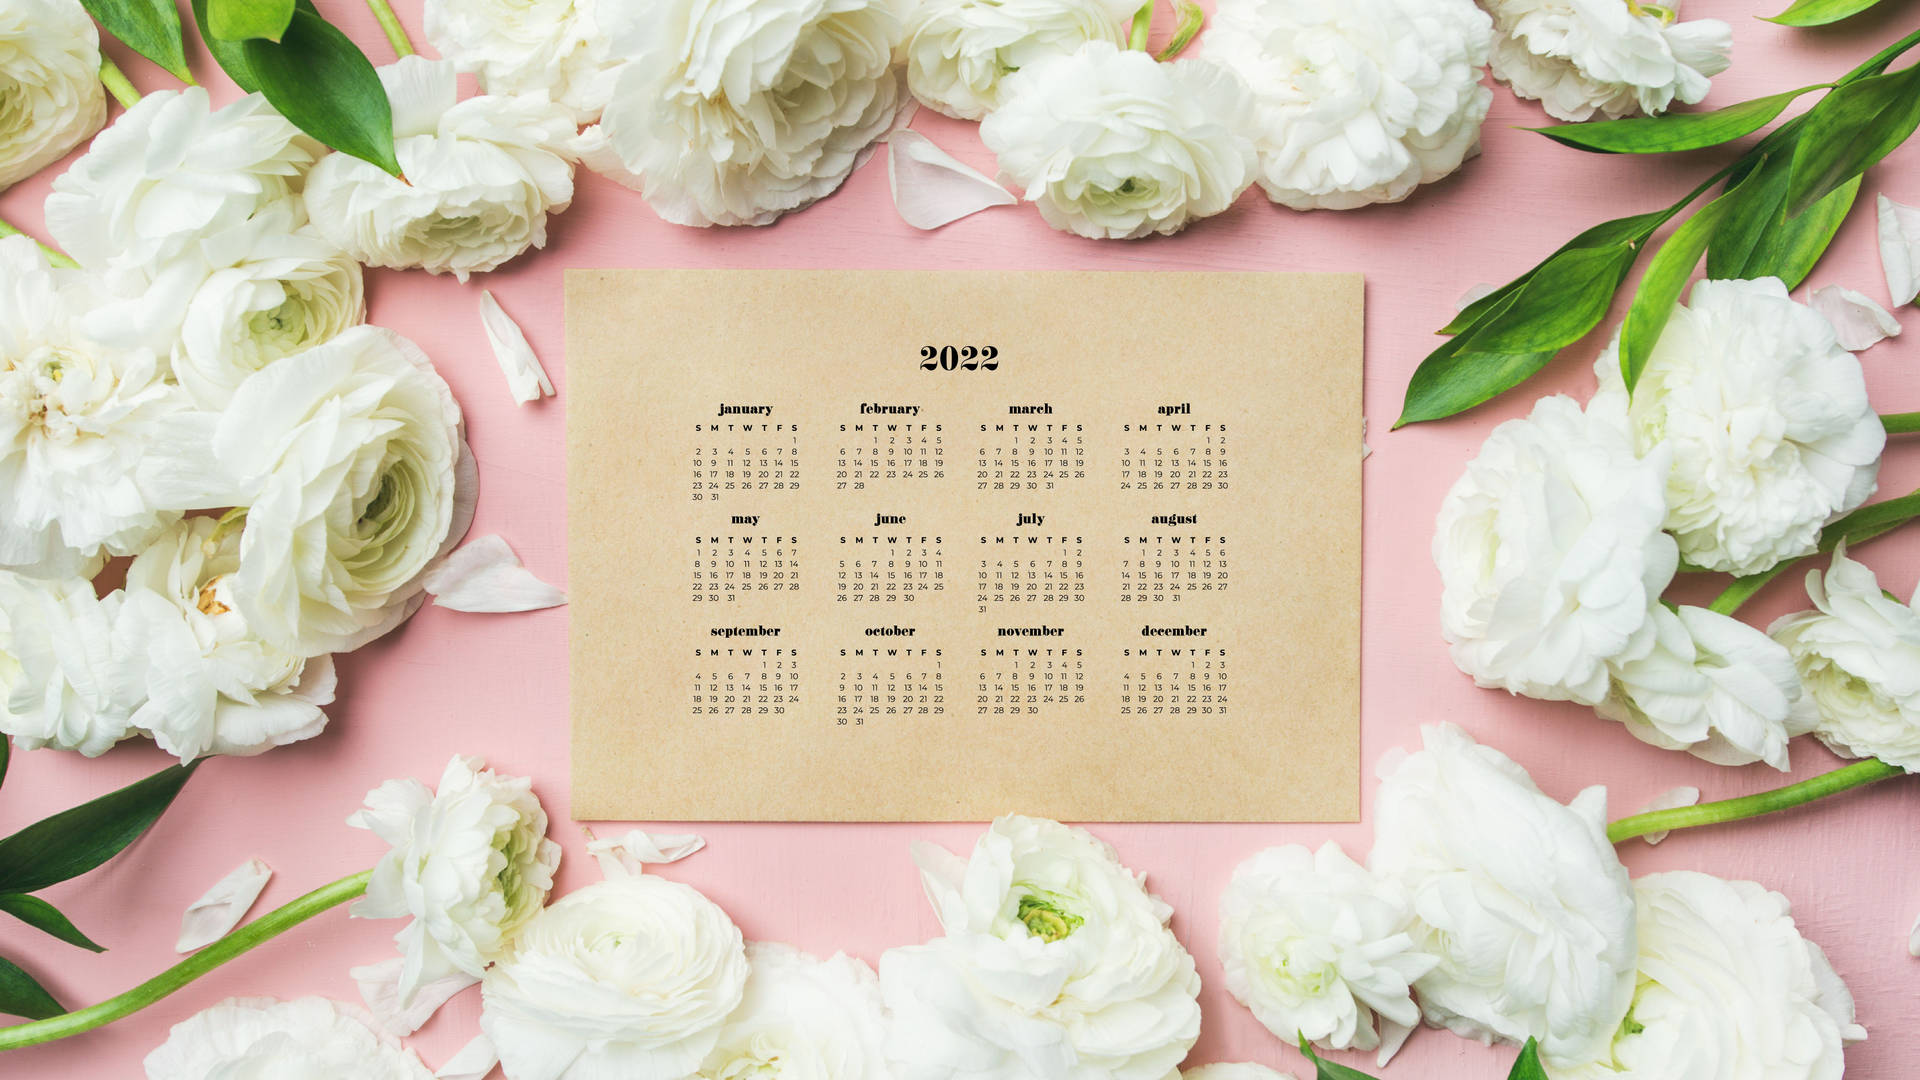 2022 Calendar With Peonies Flower Background